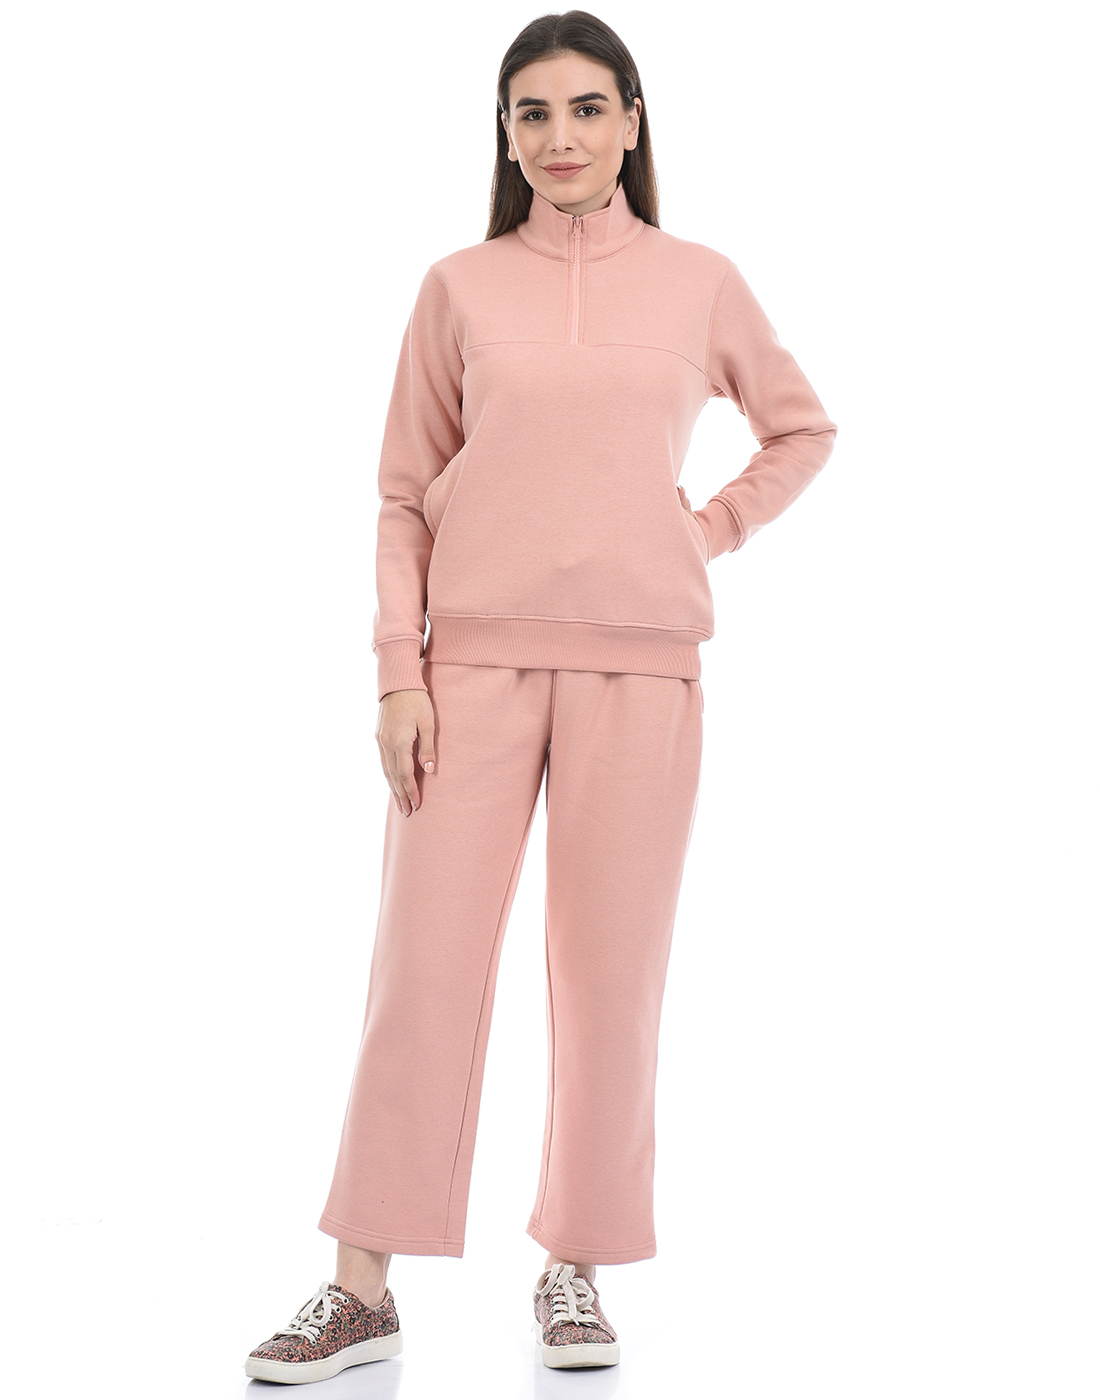 ONEWAY Women Solid Pink Track Suit